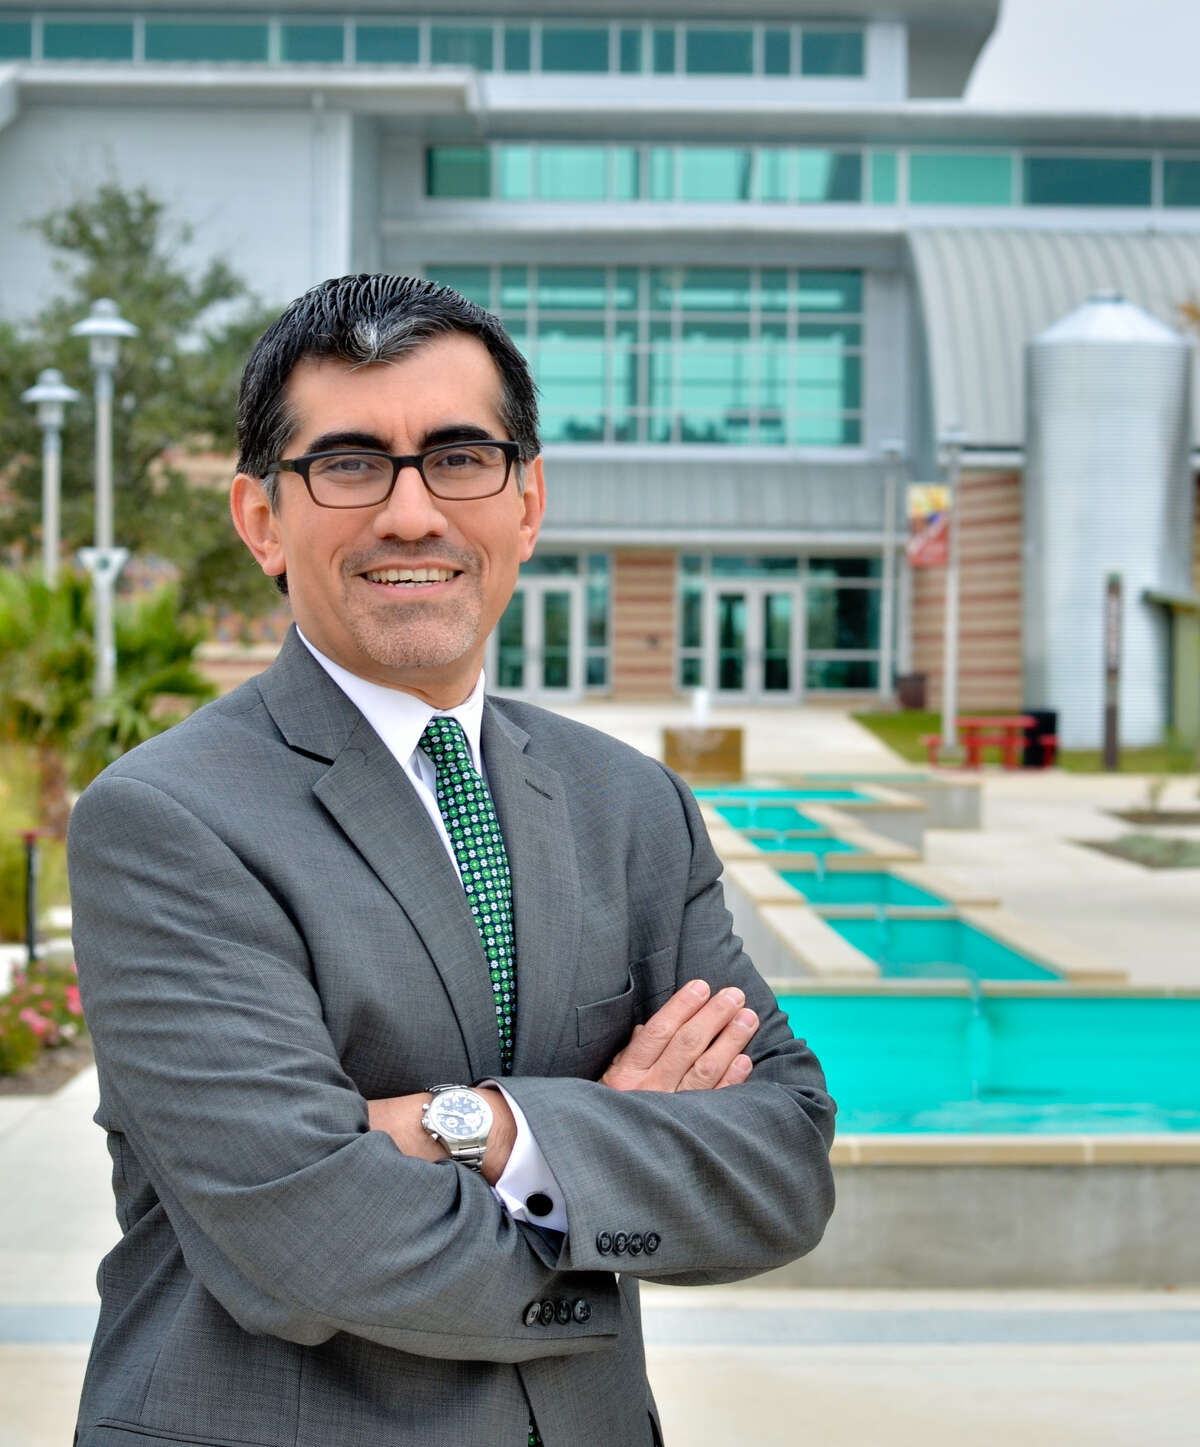 Alamo Colleges named Mike Flores as the new chancellor of the district on Saturday, March 3, 2018.